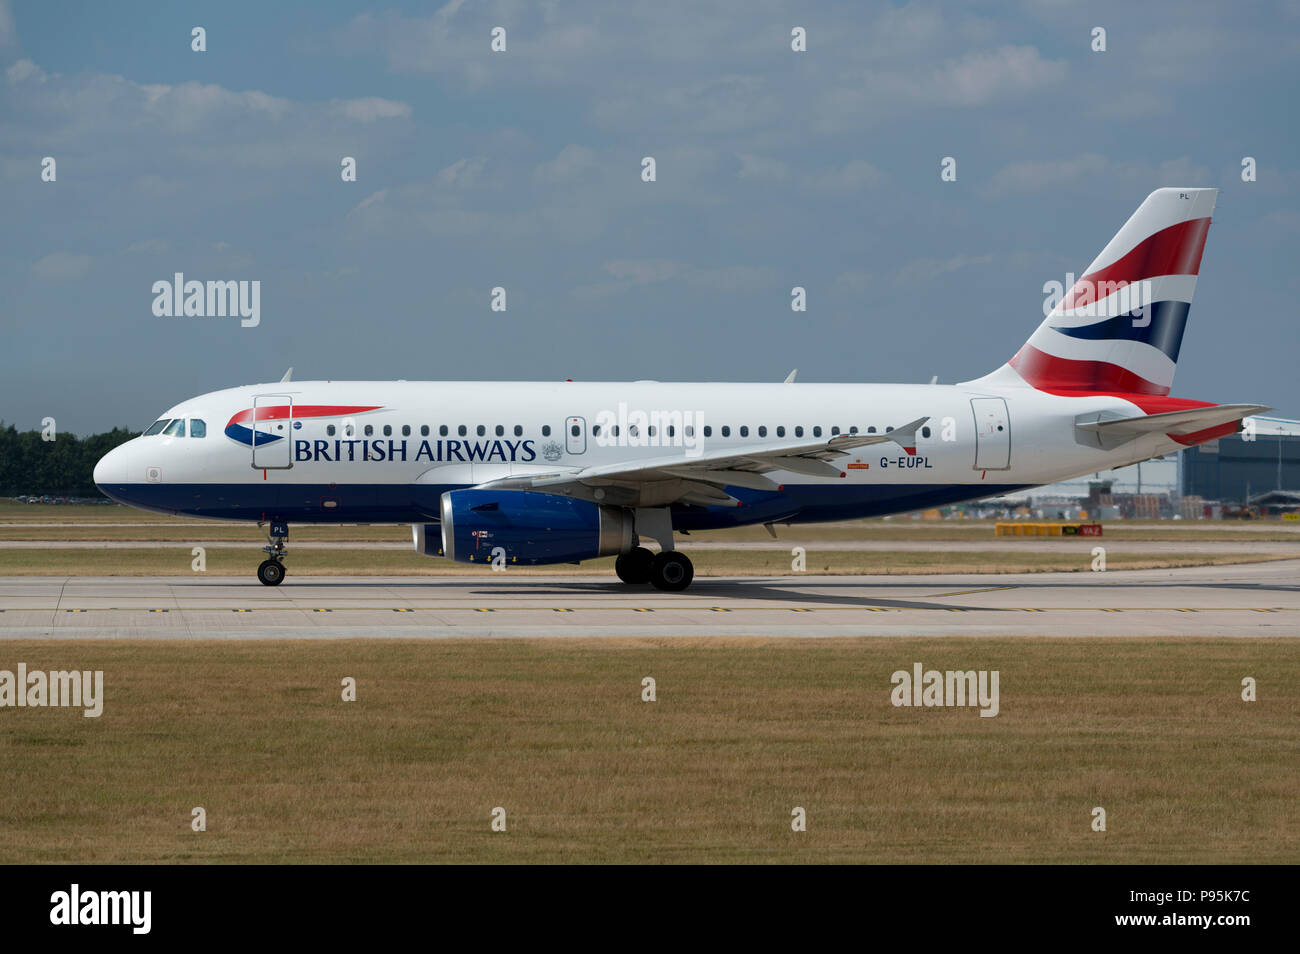 A British Airways A319 sits on the runway at Manchester Airport as it prepares to take-off. Stock Photo